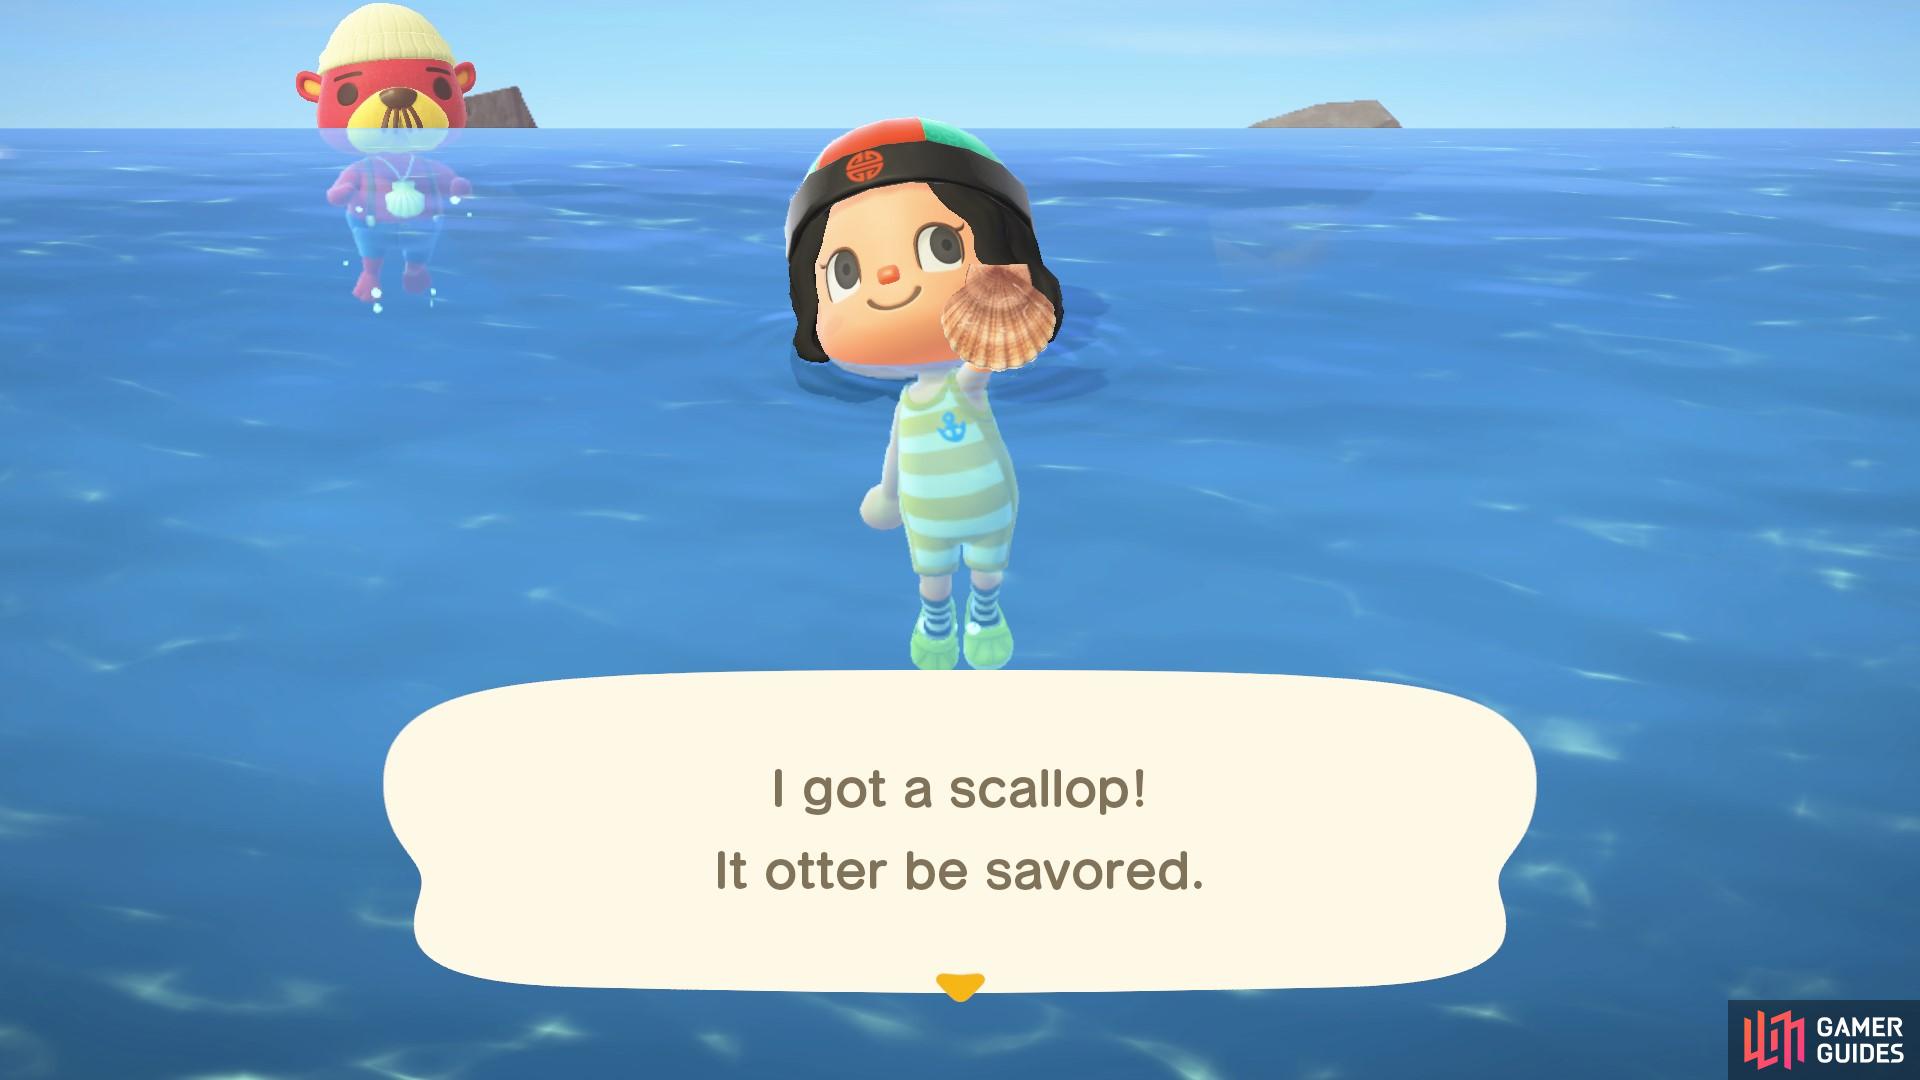 Don’t forget to trade your scallops for deep thoughts and DIYs from Pascal.